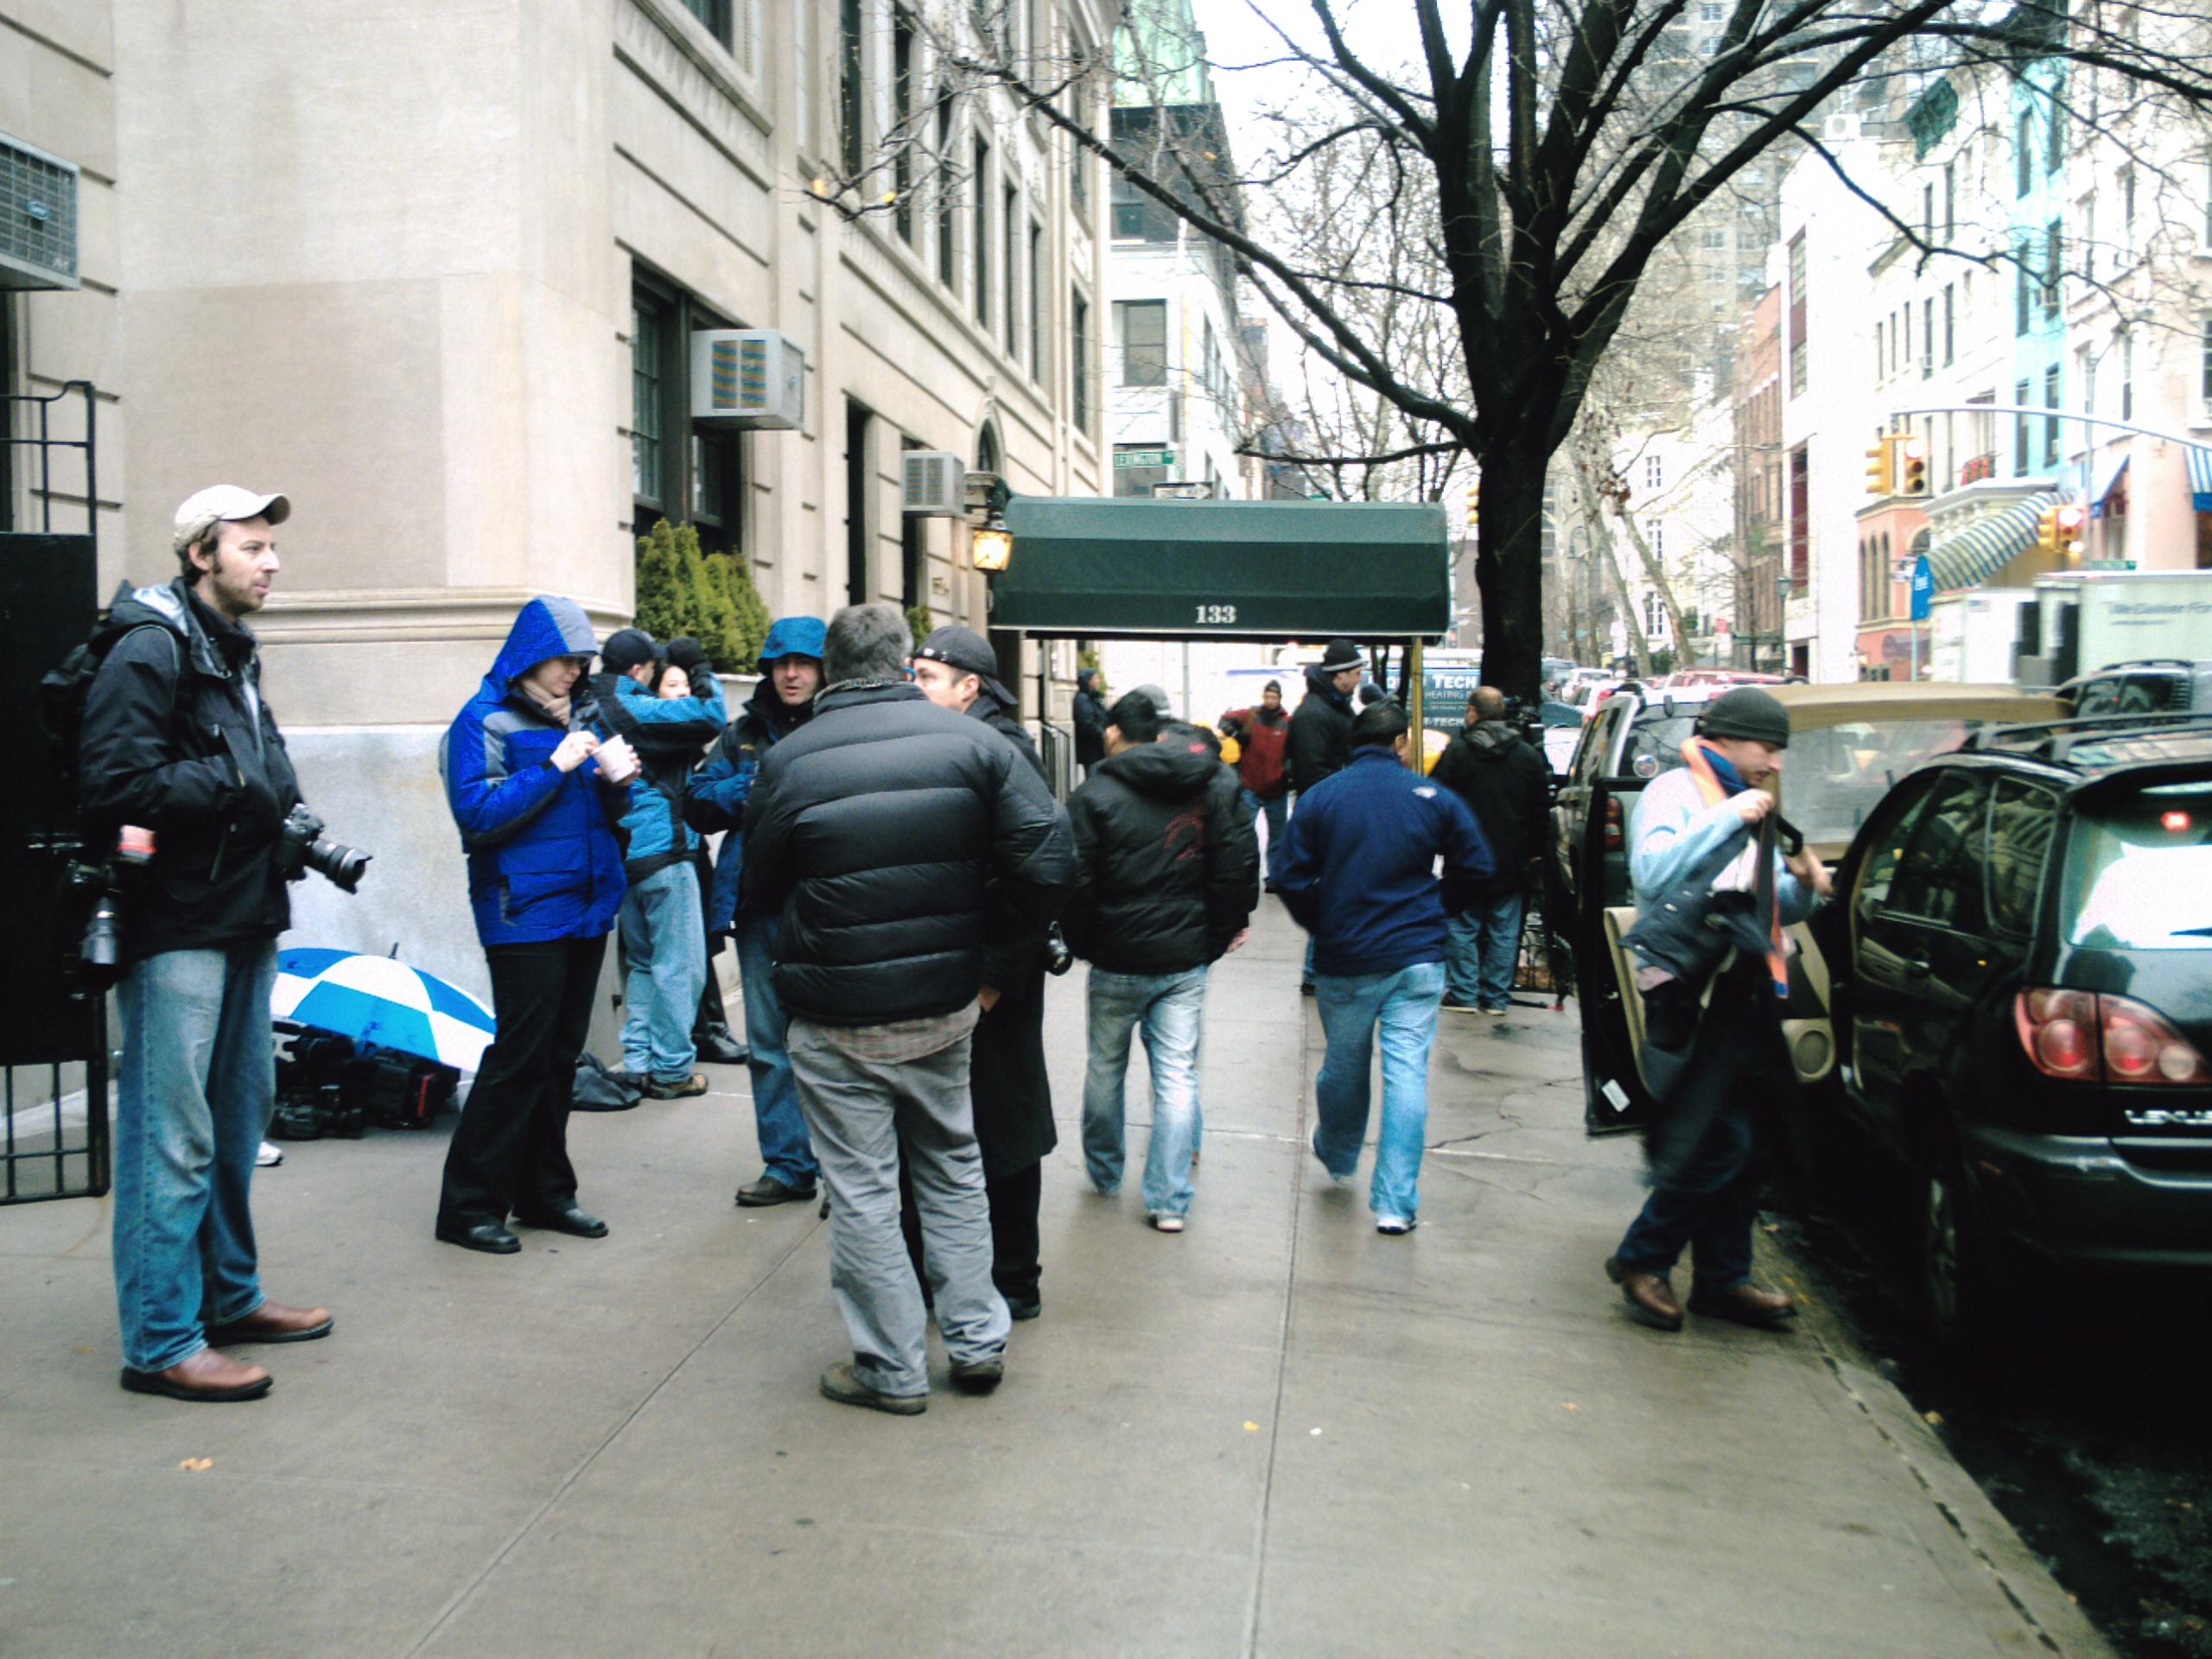 Photographers waiting outside the entrance to the apartment block where Bernard Madoff was under house arrest. Red Carlisle via flickr